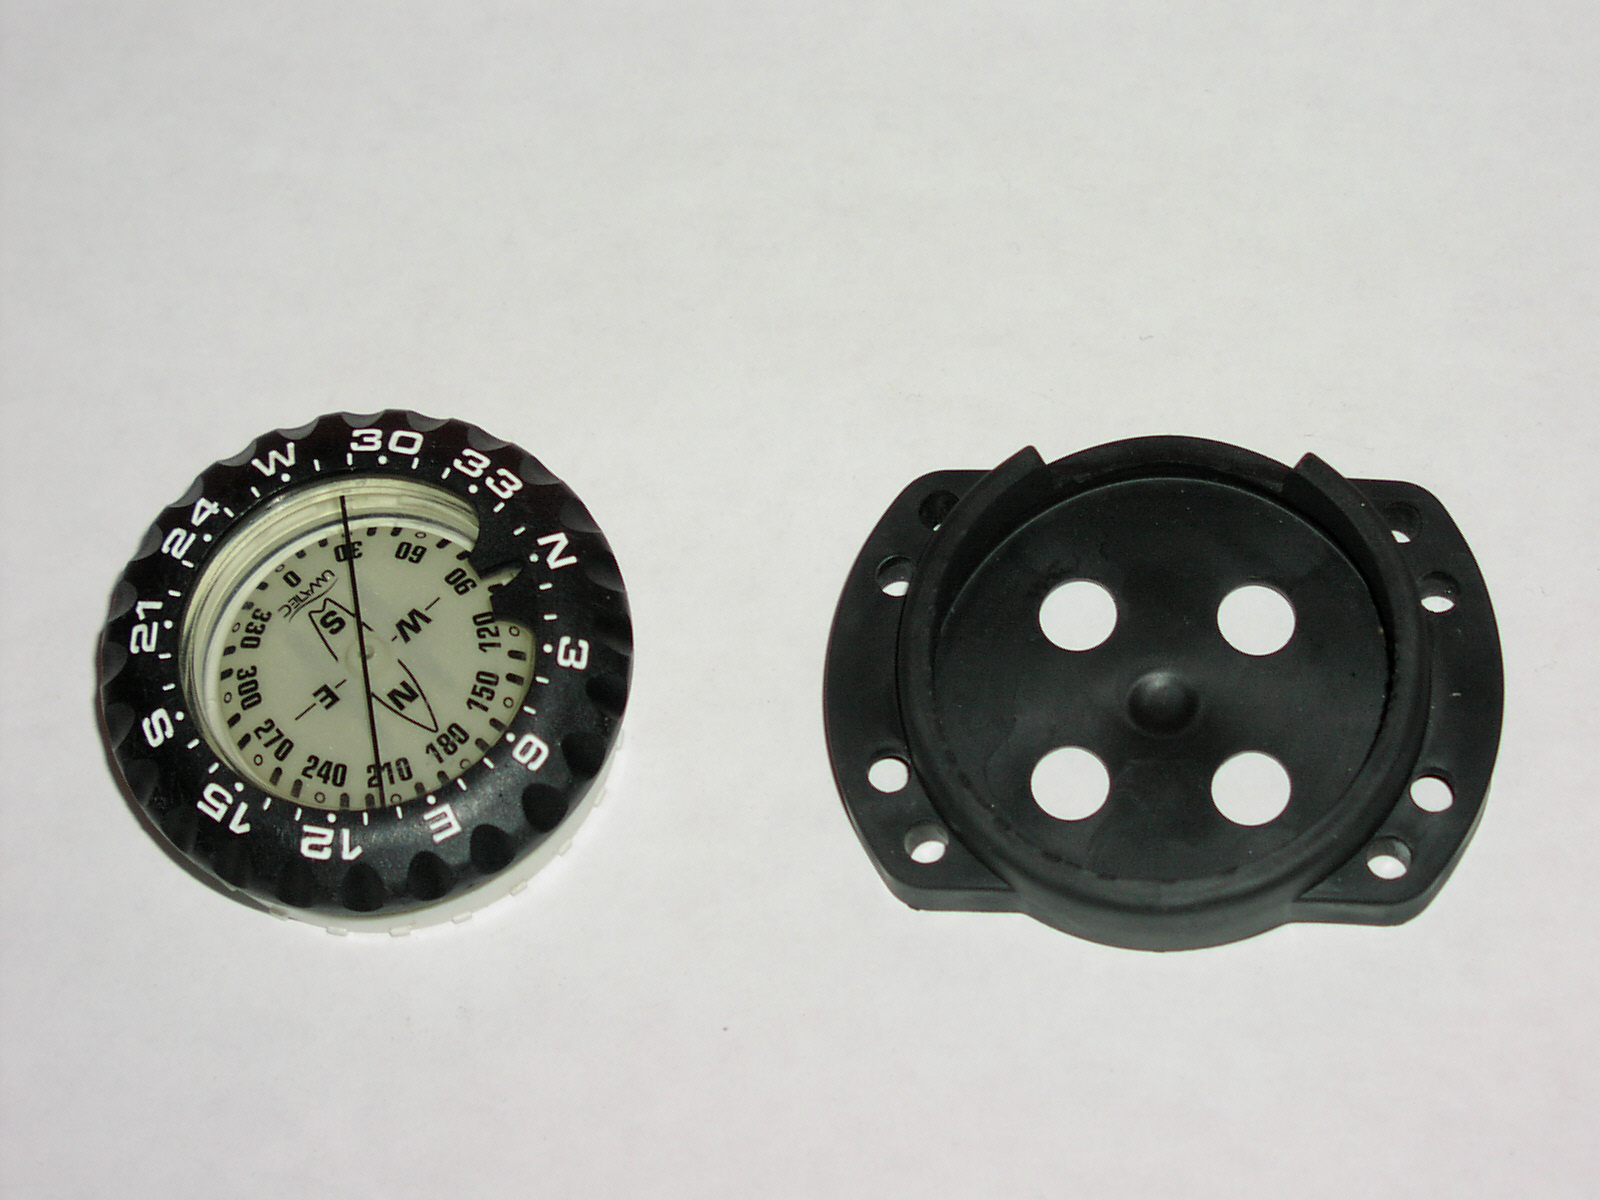 Uwatec  FS-1  Compass Bungee Ready Mount